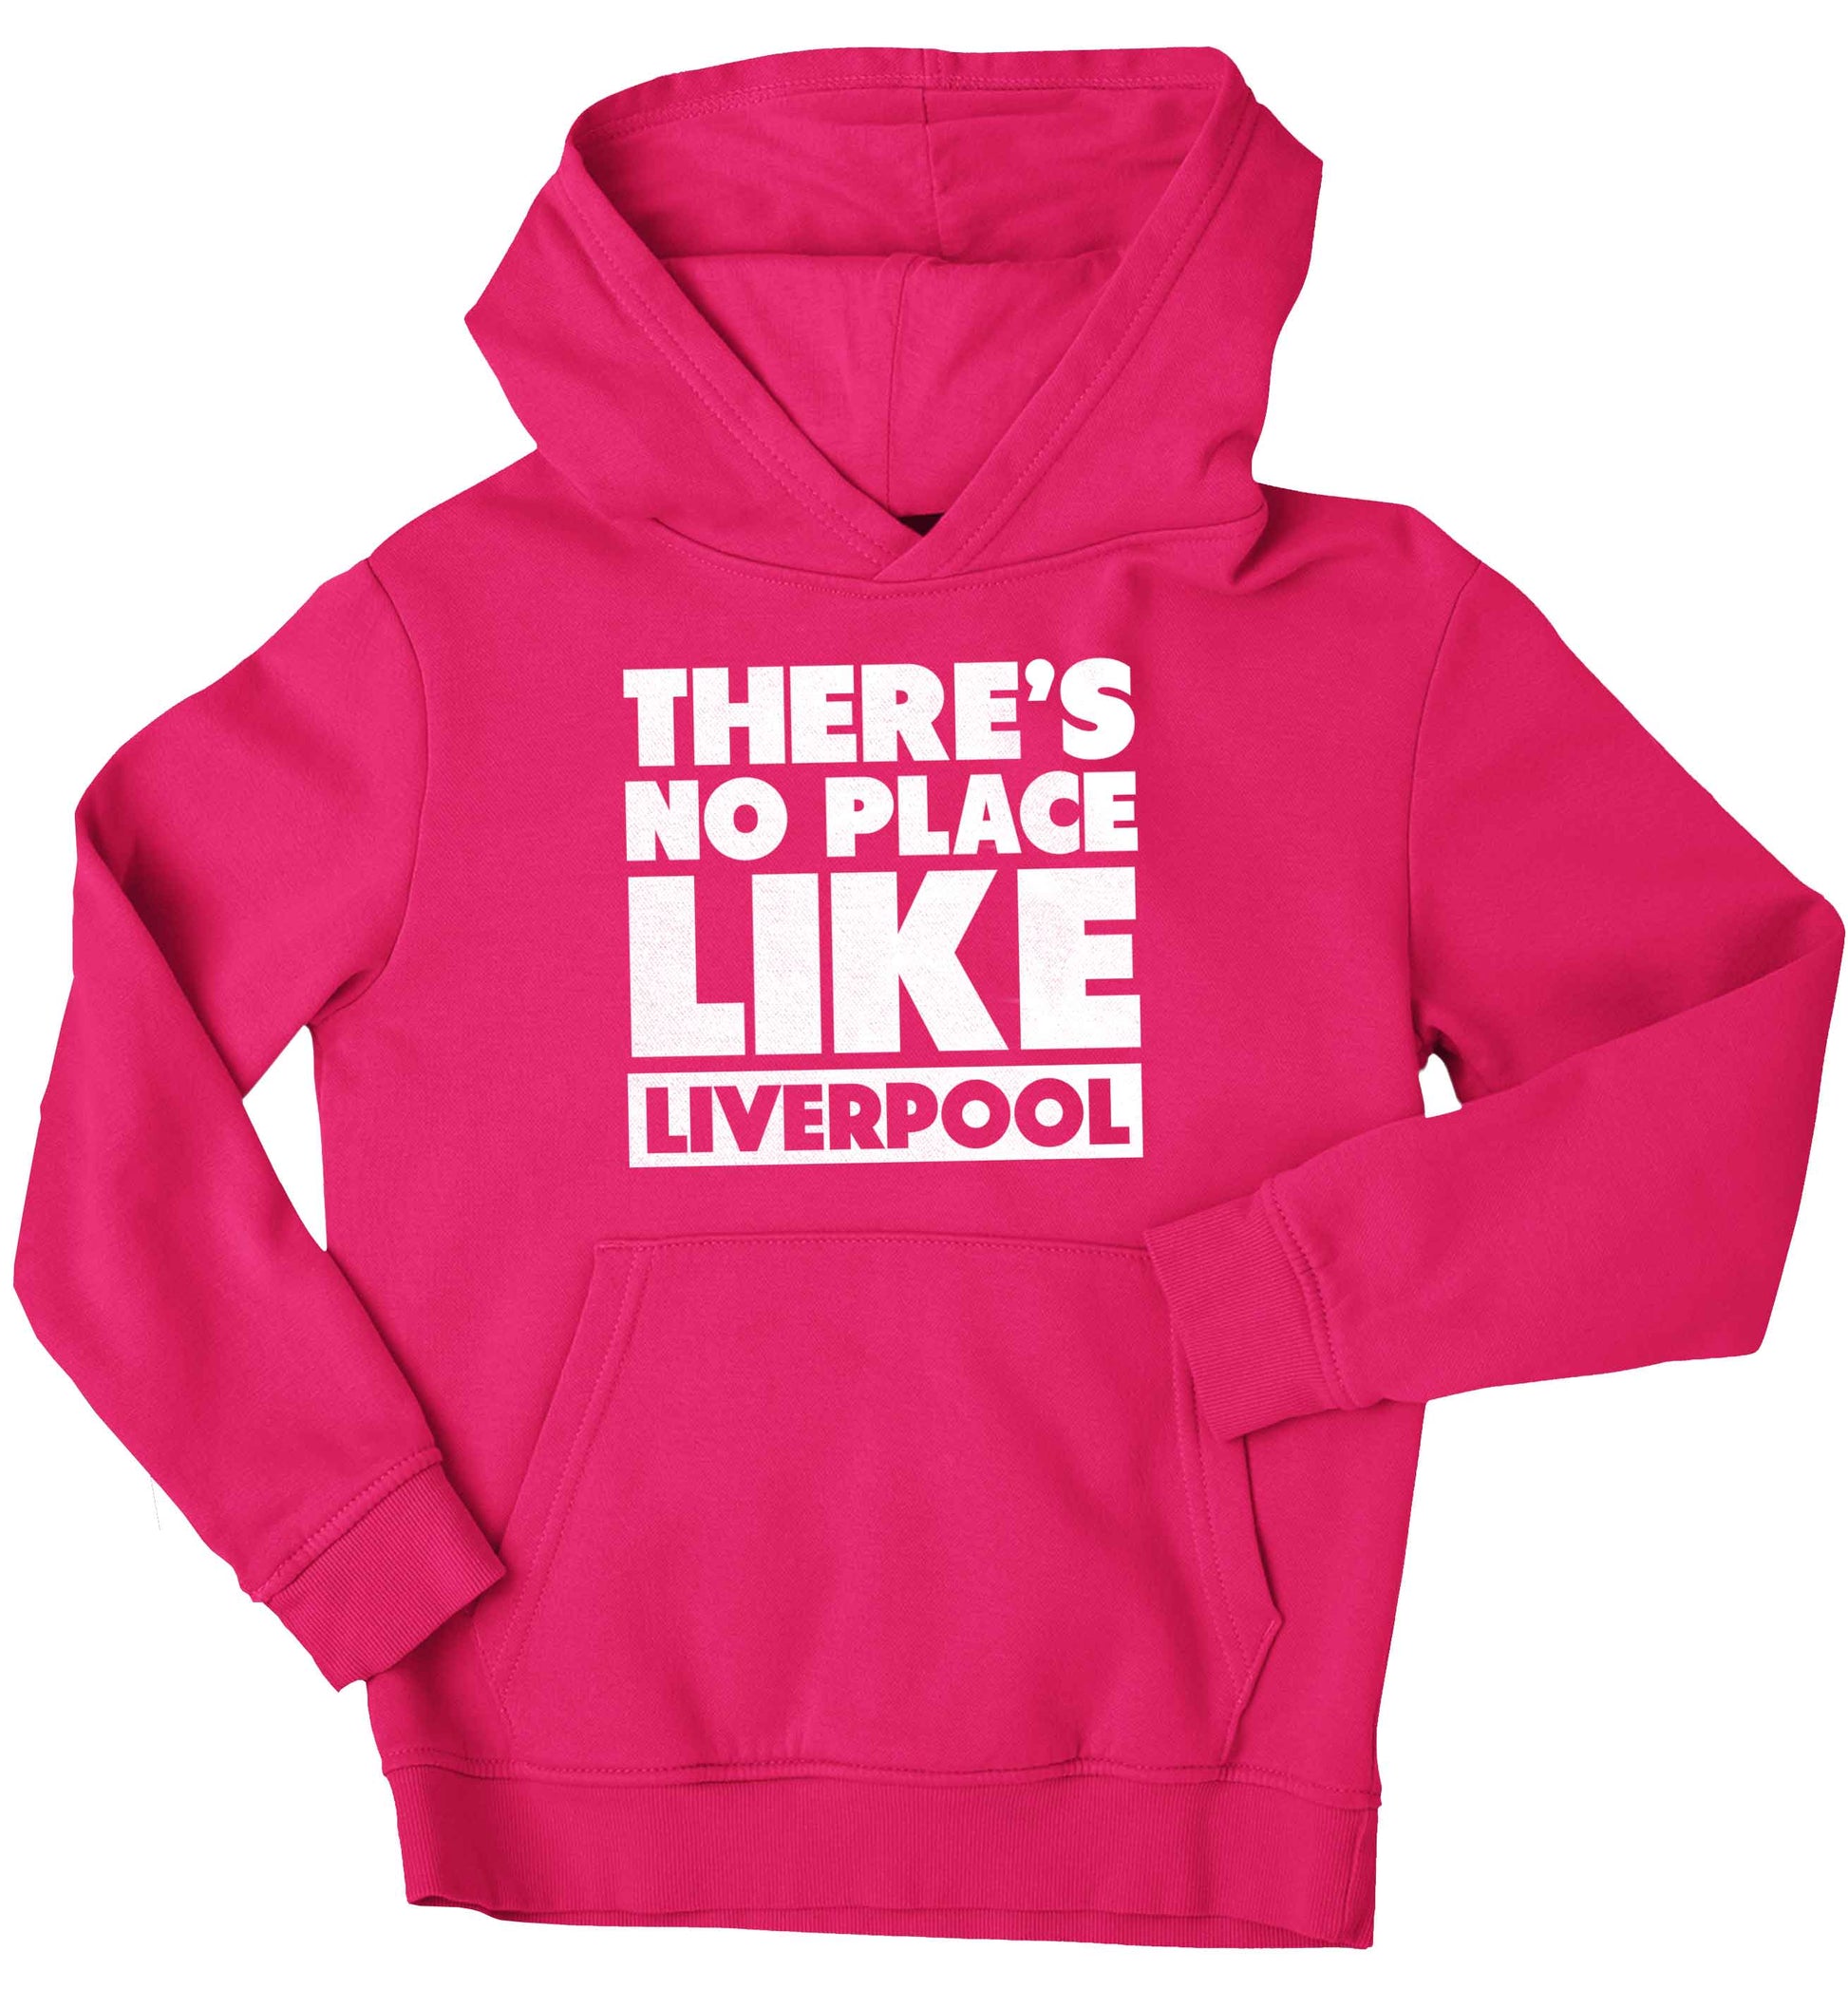 There's no place like Liverpool children's pink hoodie 12-13 Years